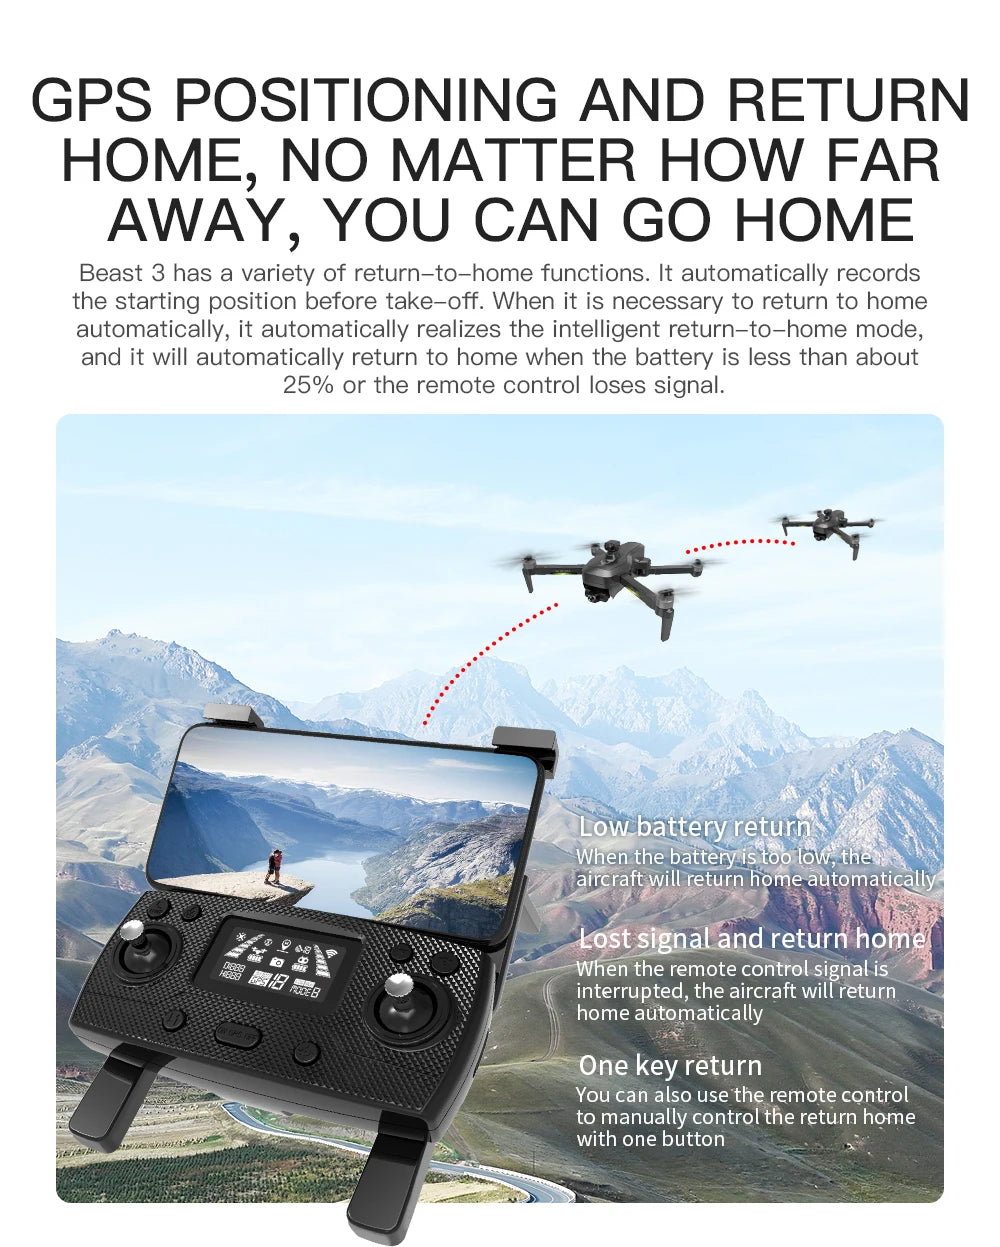 HGIYI SG906 MAX2  Drone, Beast 3 has a variety of return-to-home functions . it will automatically return